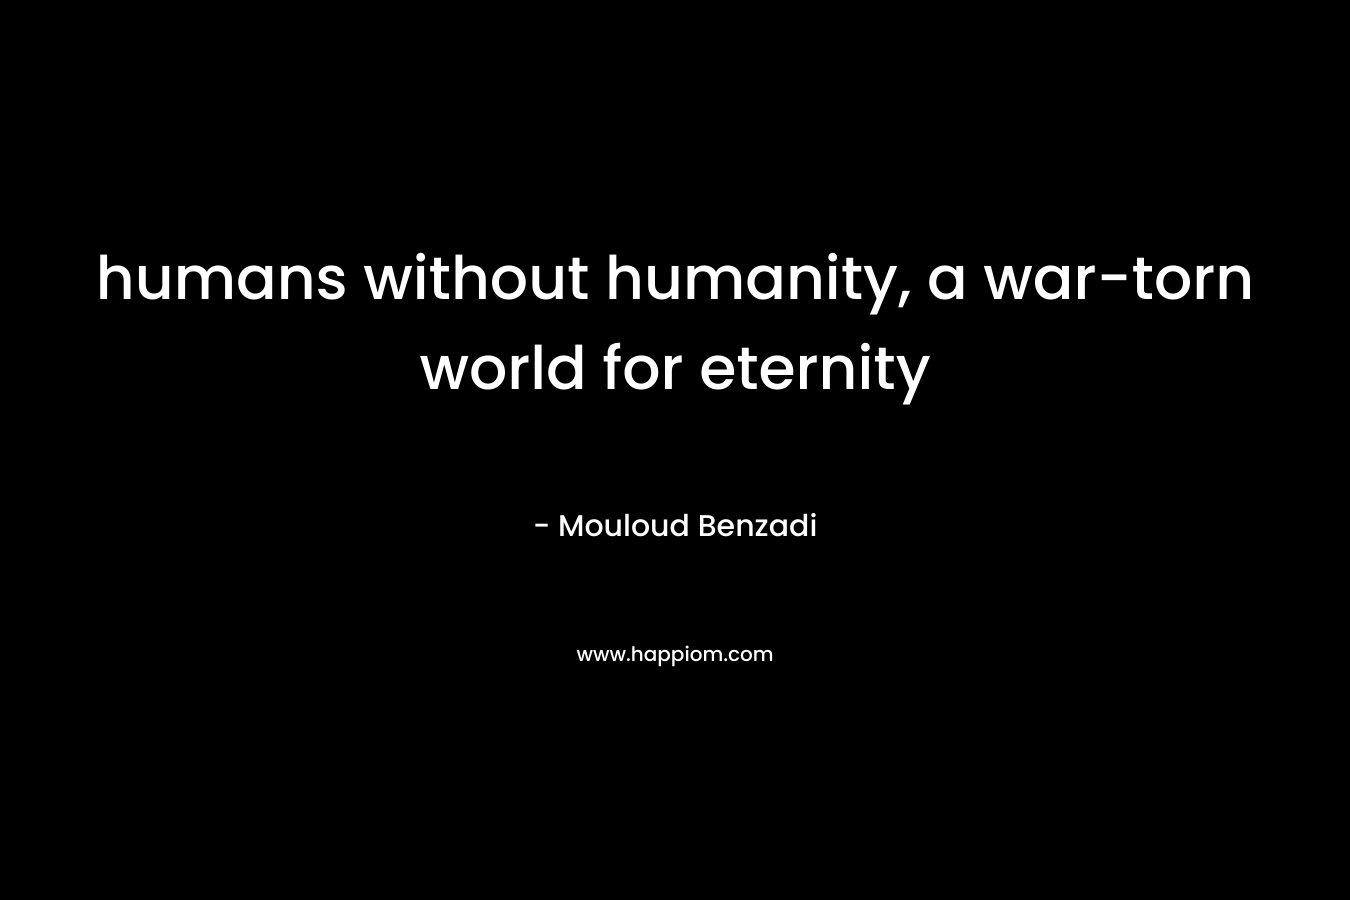 humans without humanity, a war-torn world for eternity